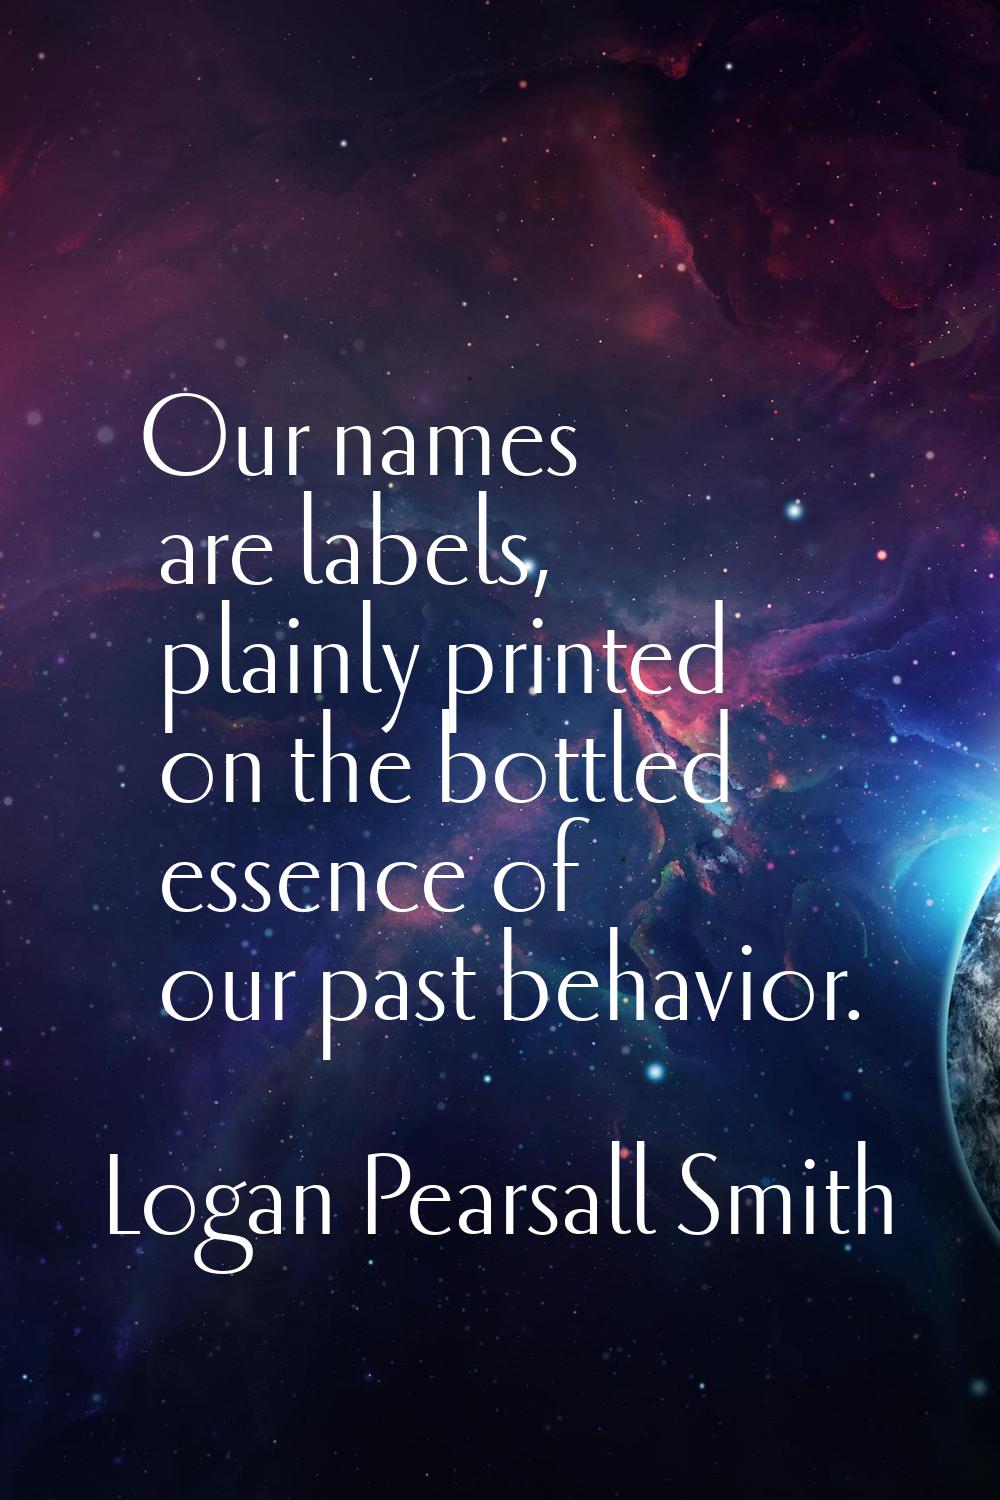 Our names are labels, plainly printed on the bottled essence of our past behavior.